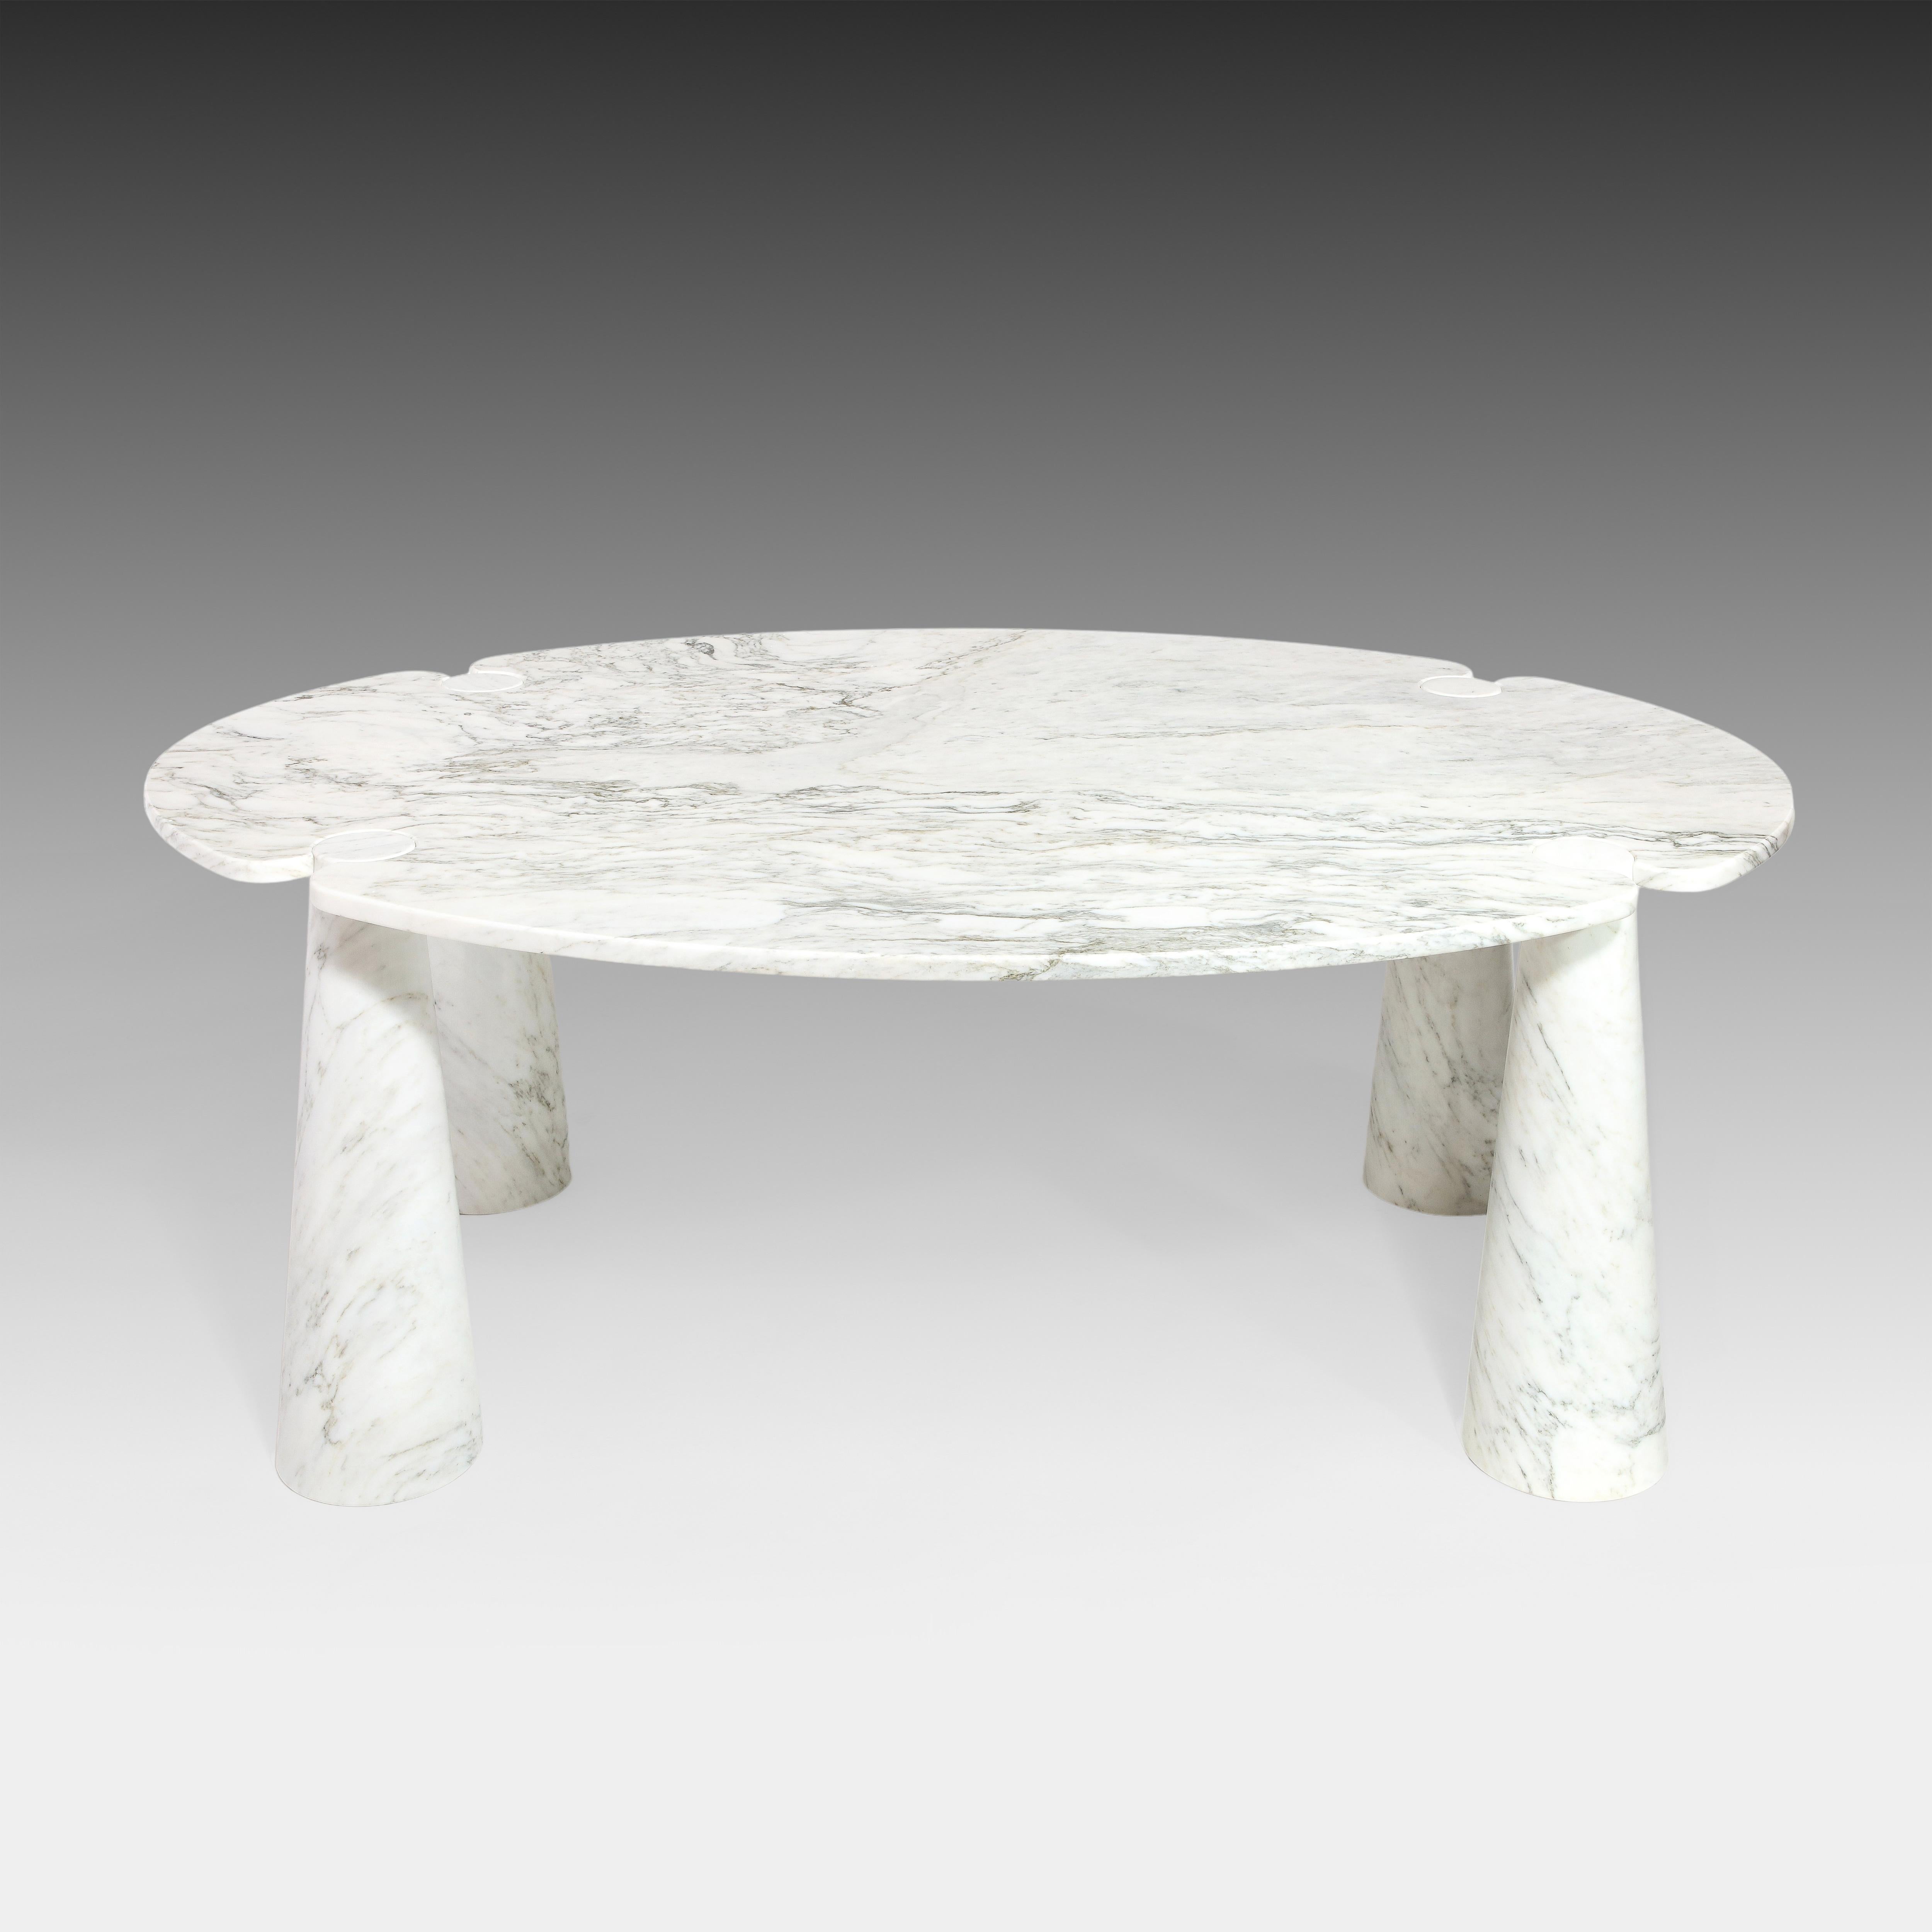 Designed by Angelo Mangiarotti for Skipper from the Eros series, iconic sculptural Carrara marble dining table with large oval top fitted on four conical bases. This elegantly organic dining table has beautiful stark veining throughout. Original